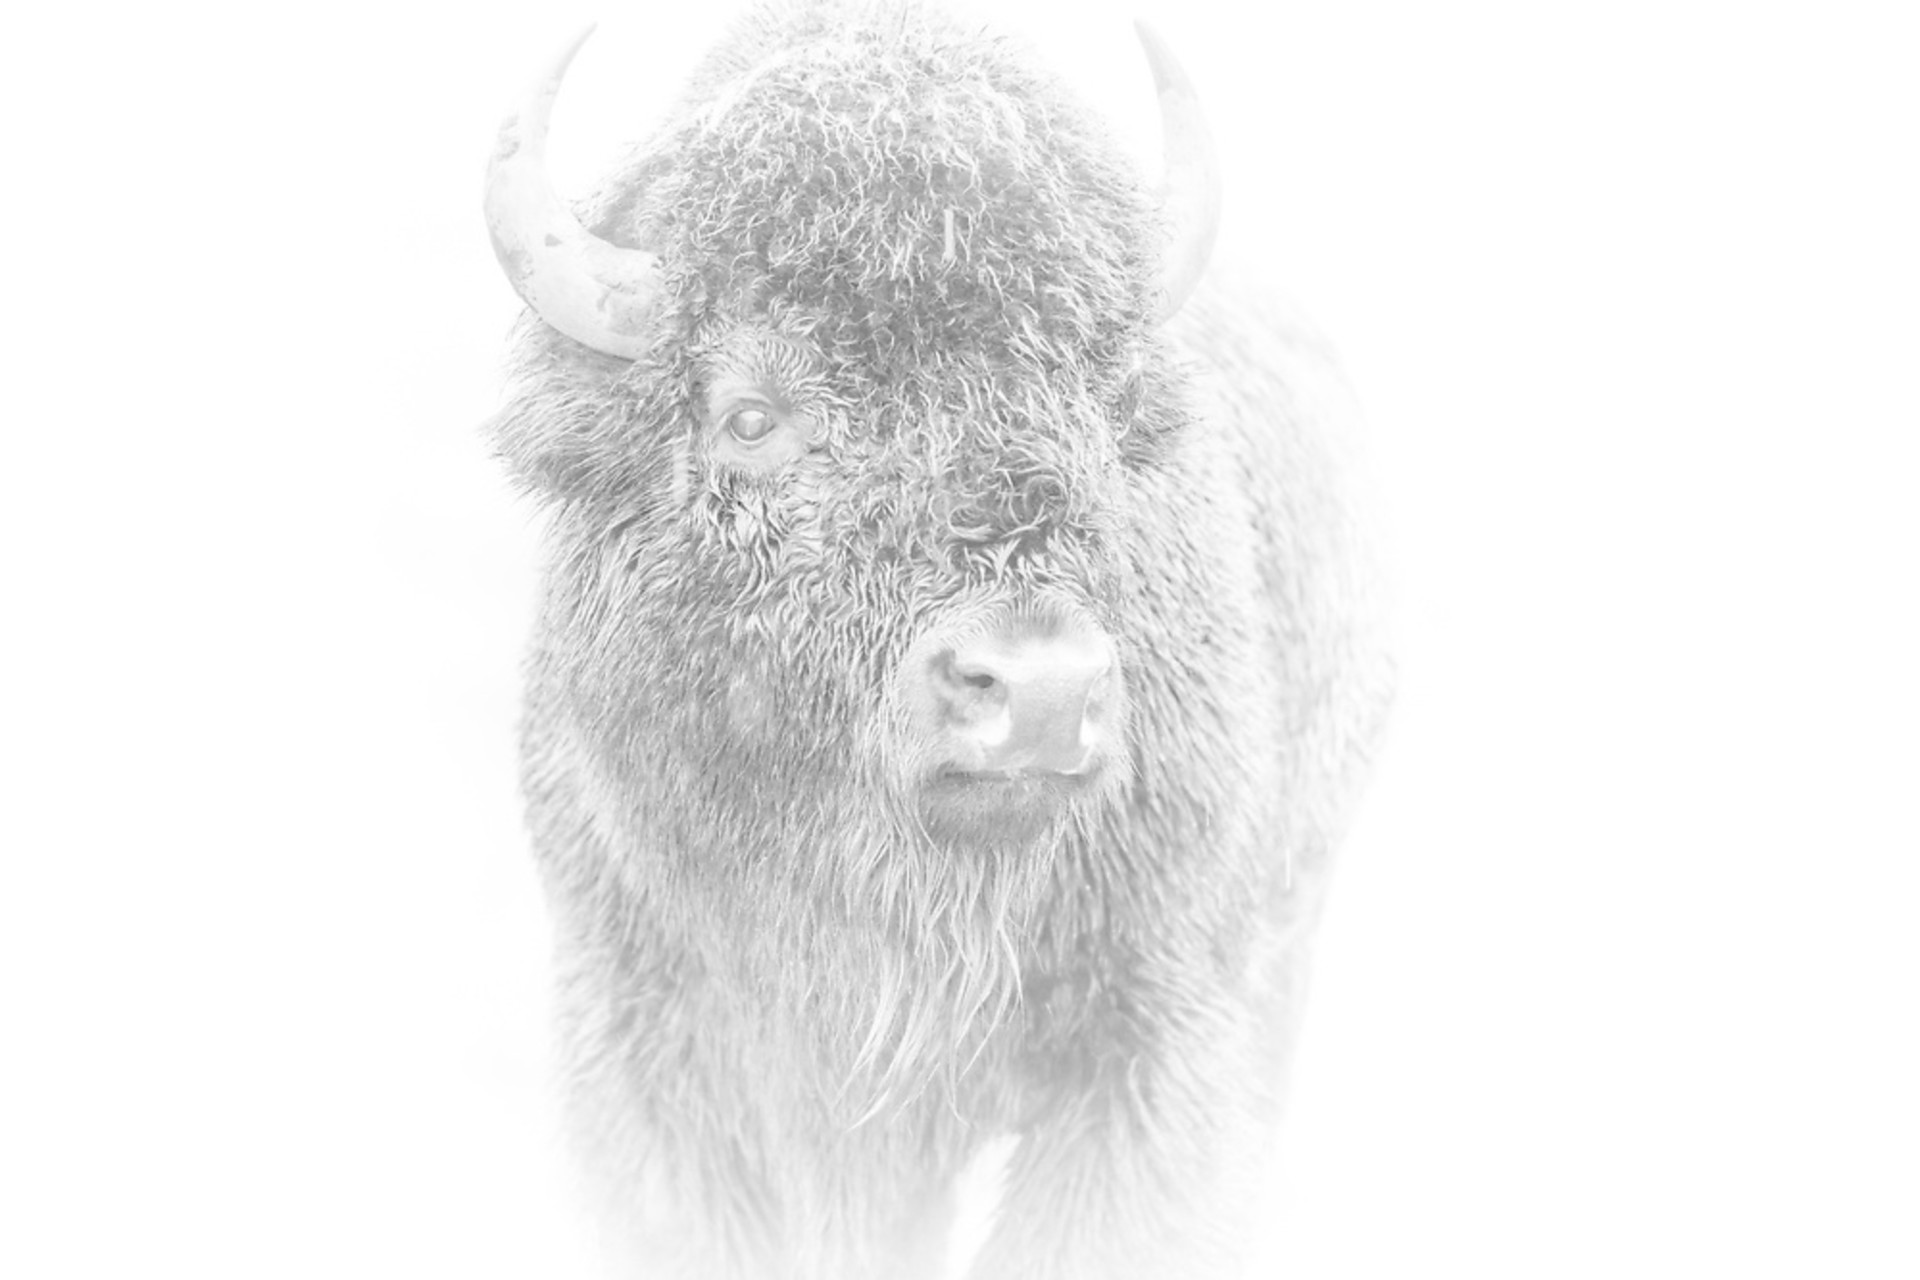 A Black And White Image Of A Bison In The Snow With A Frosty Coat By Dwight Vasel At Gallery Wild